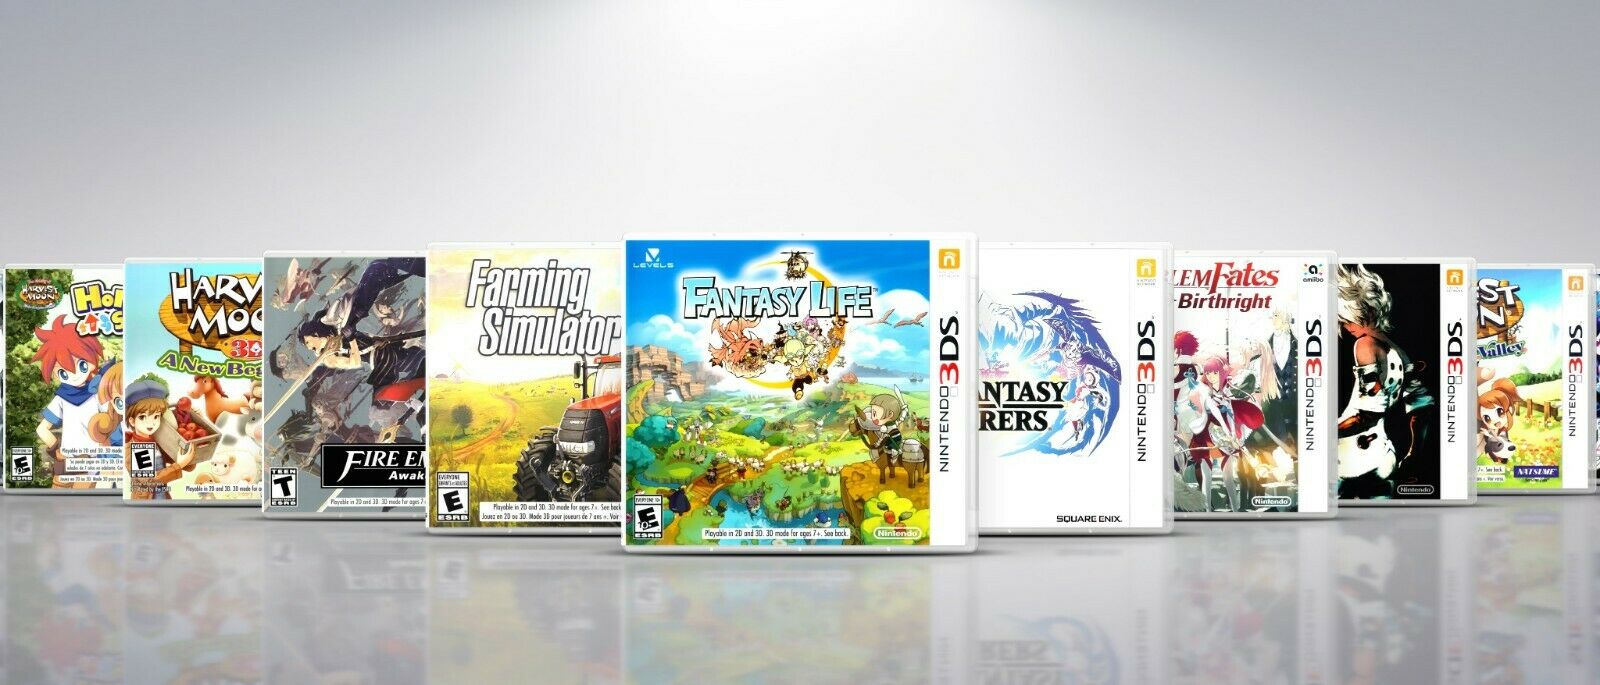 Replacement Nintendo 3ds Titles F-l Covers And Cases. No Games!